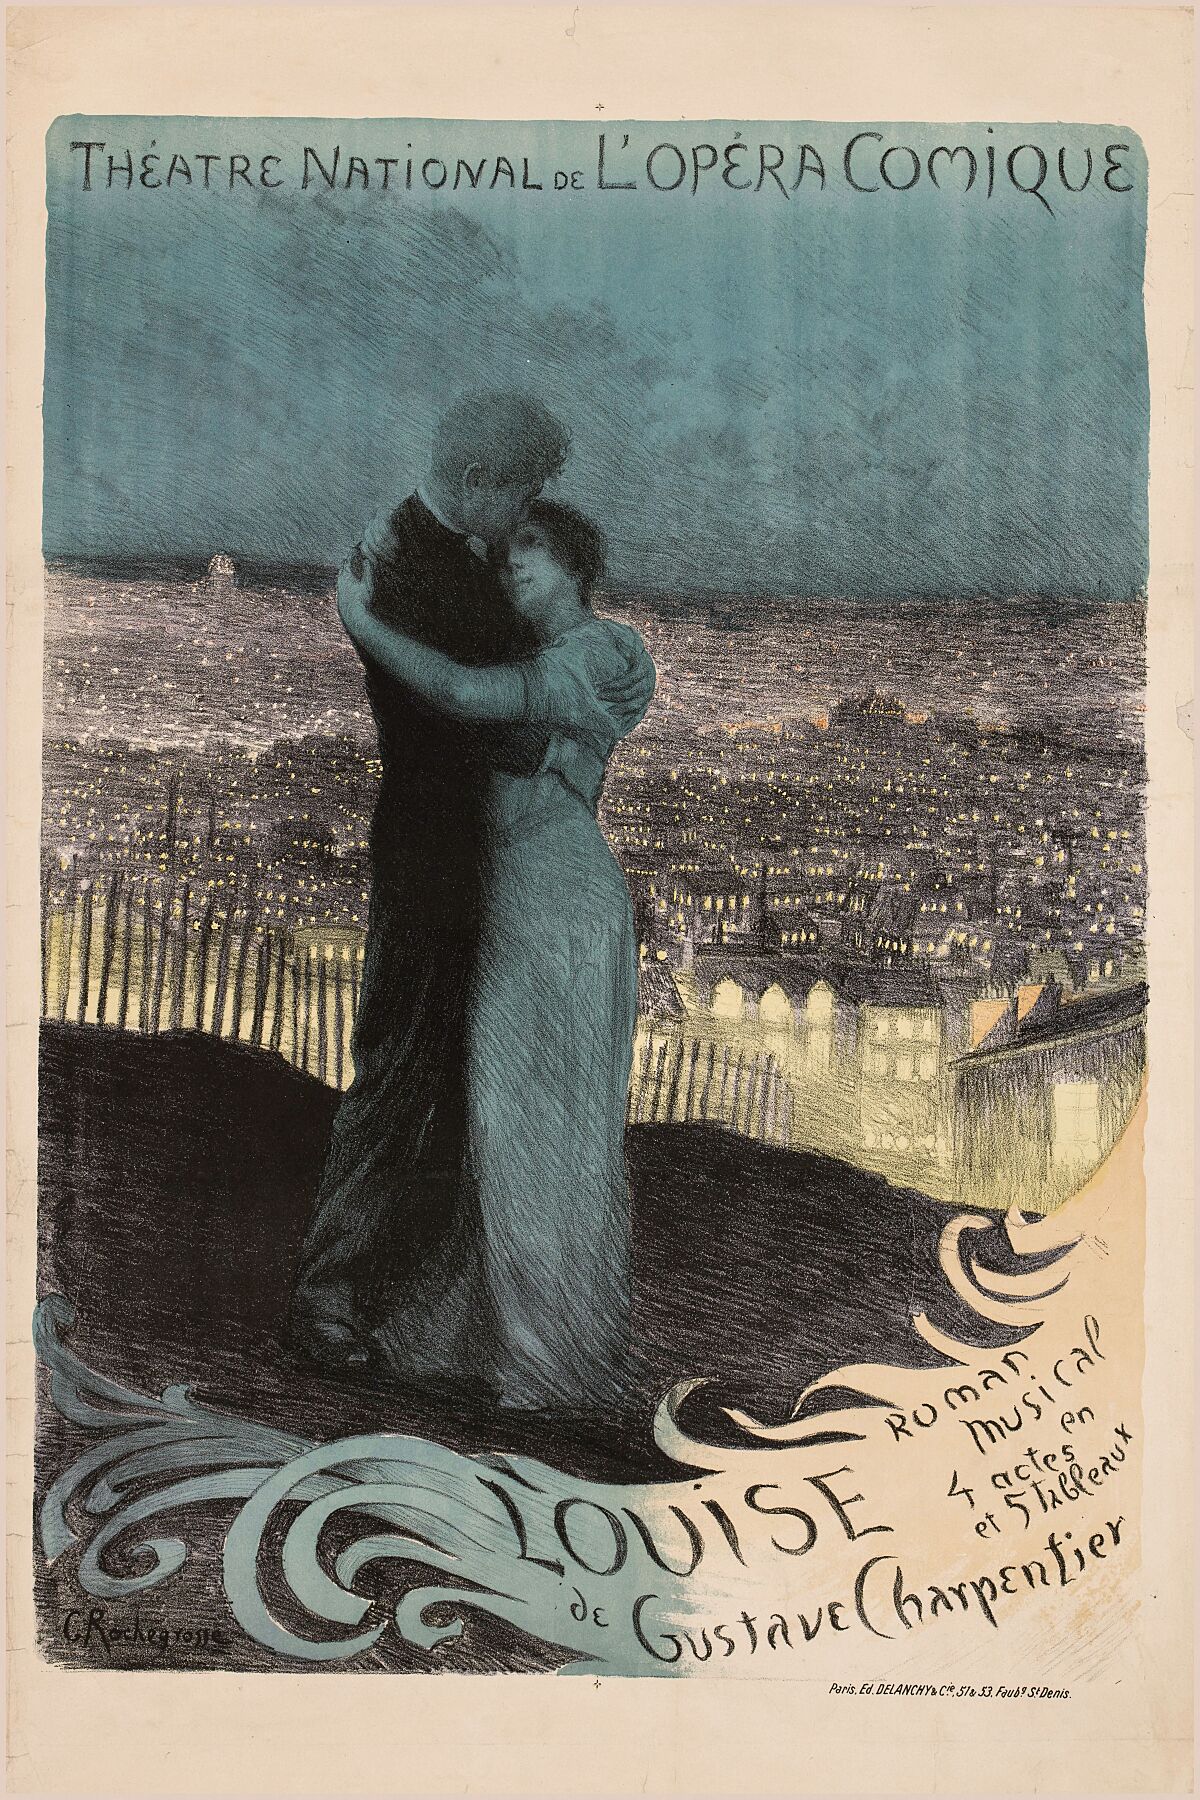 Poster published for the world premiere of Louise (Charpentier) (February 2, 1900) Georges Antoine Rochegrosse (French, 1859 - 1938)